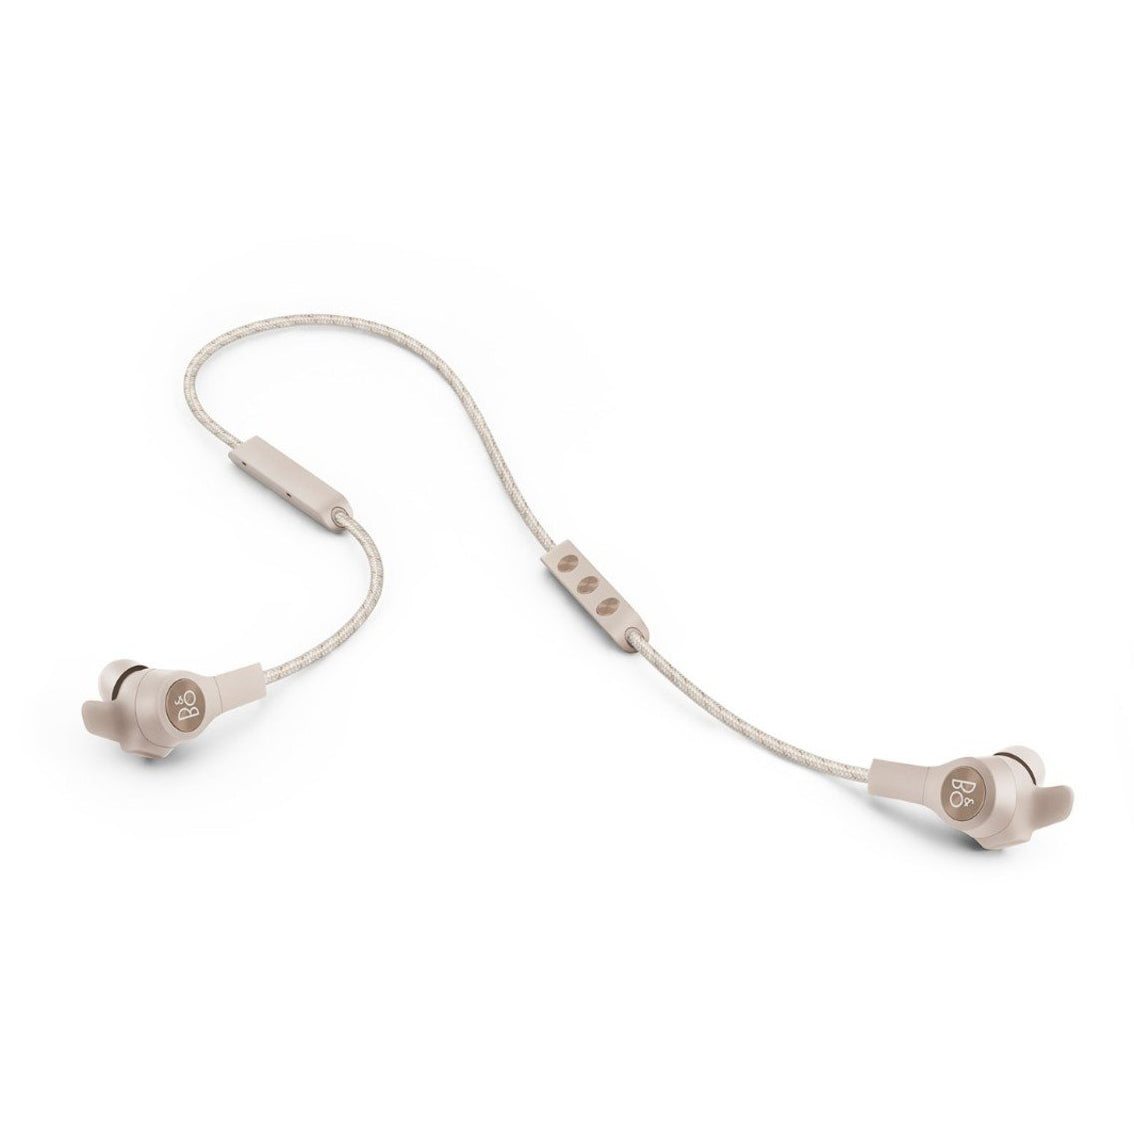 Bang & Olufsen Beoplay E6 Bluetooth (4487186972744)